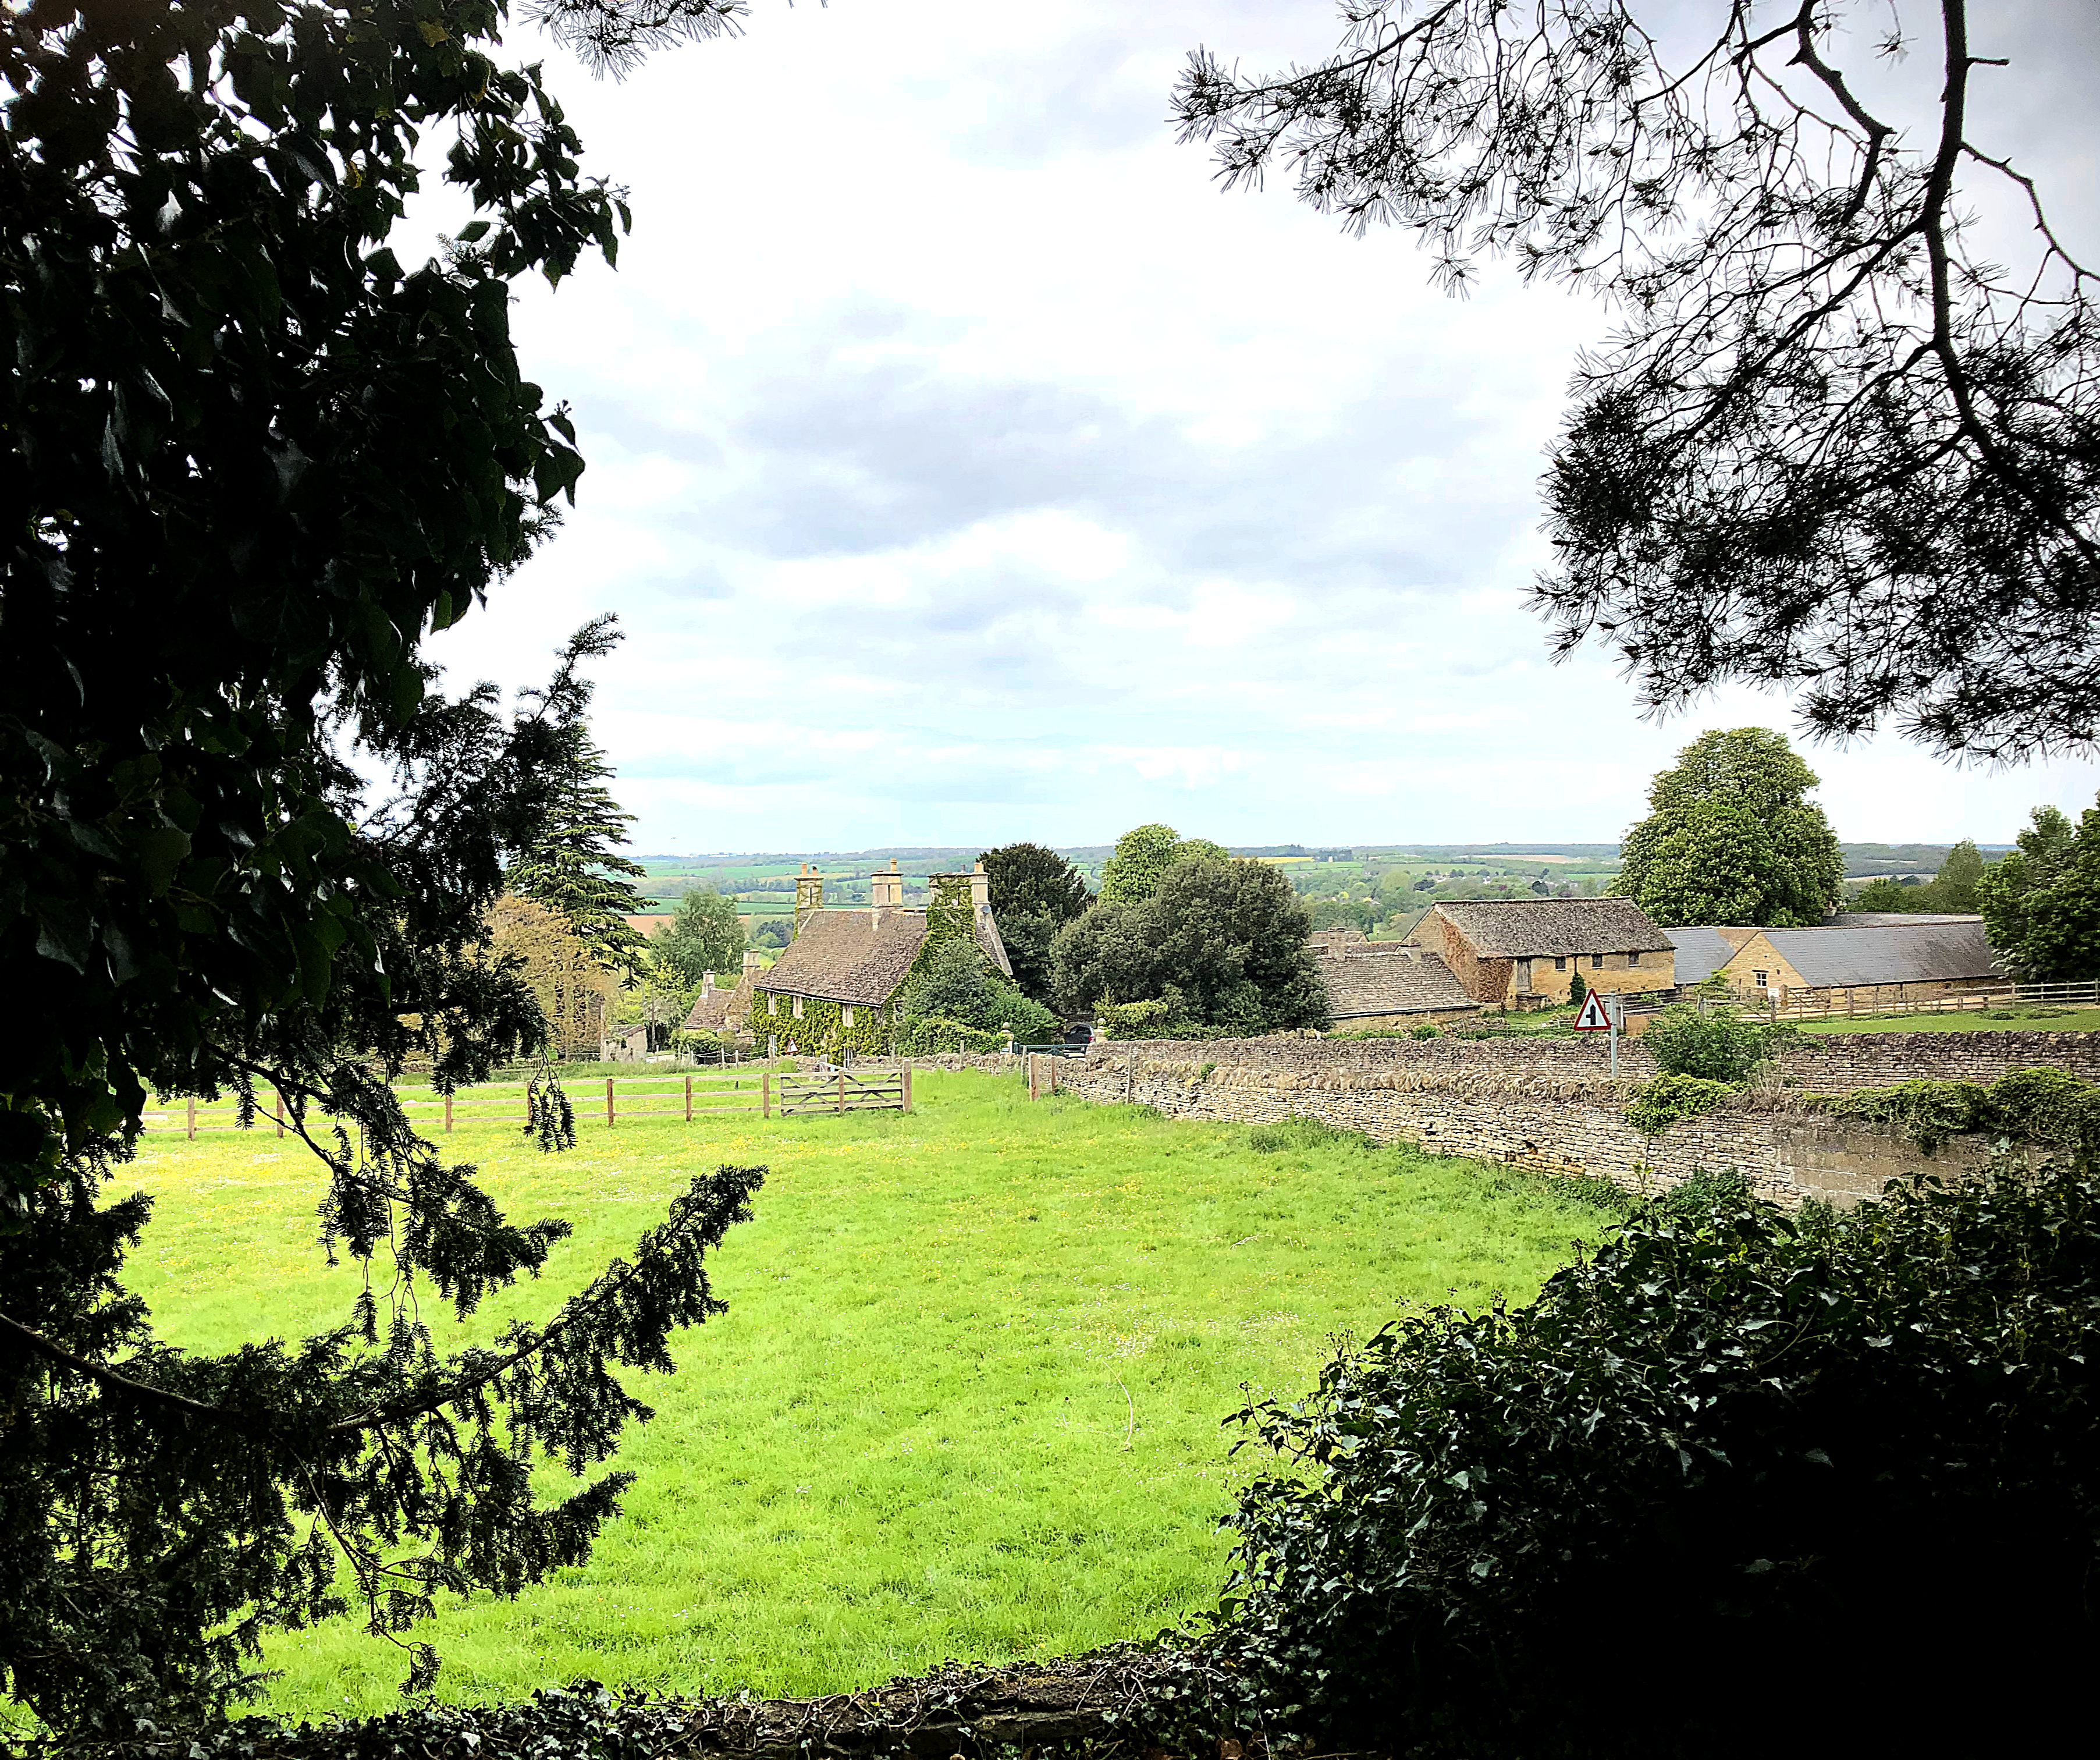 View over the Welland Valley at Collyweston